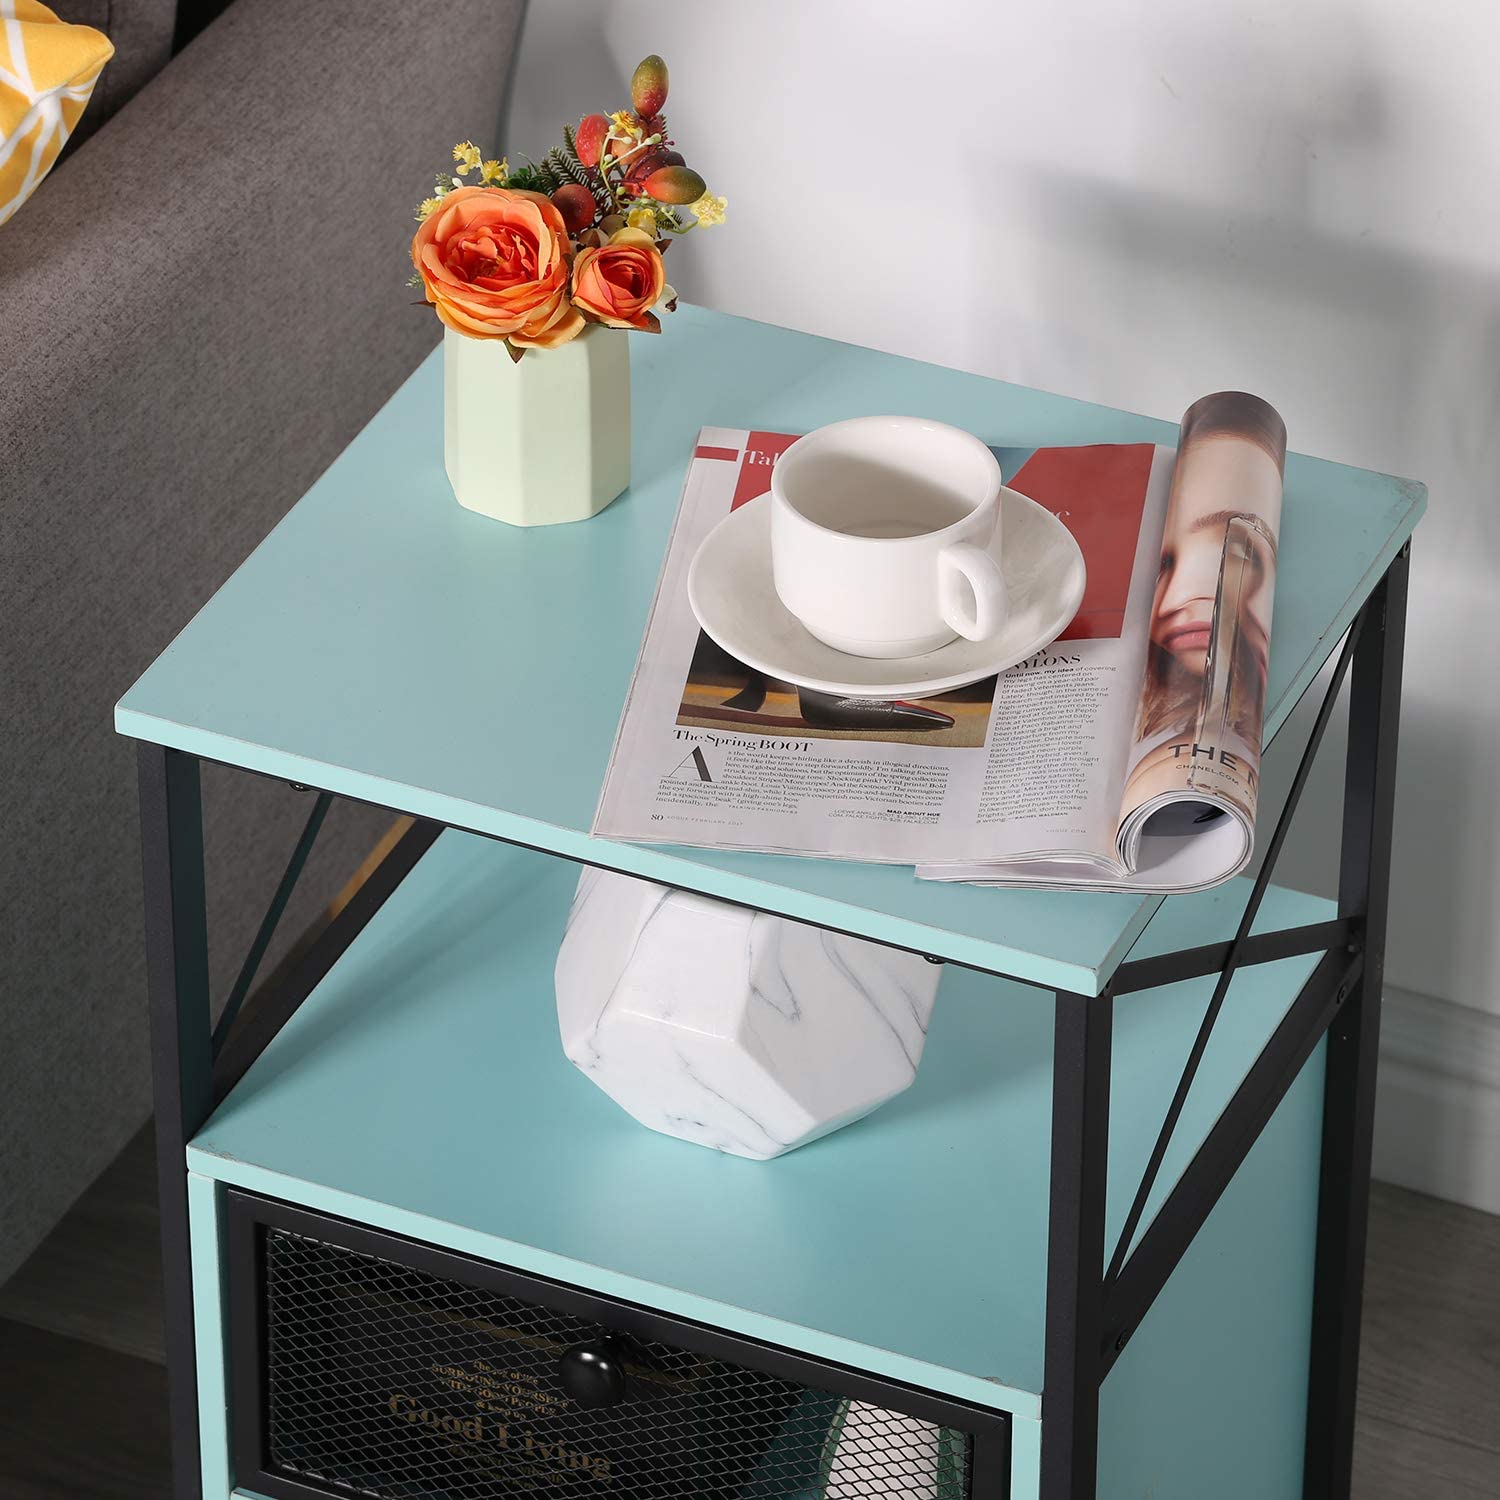 Side Tables: End Side Table with Storage Space and Flip Drawers